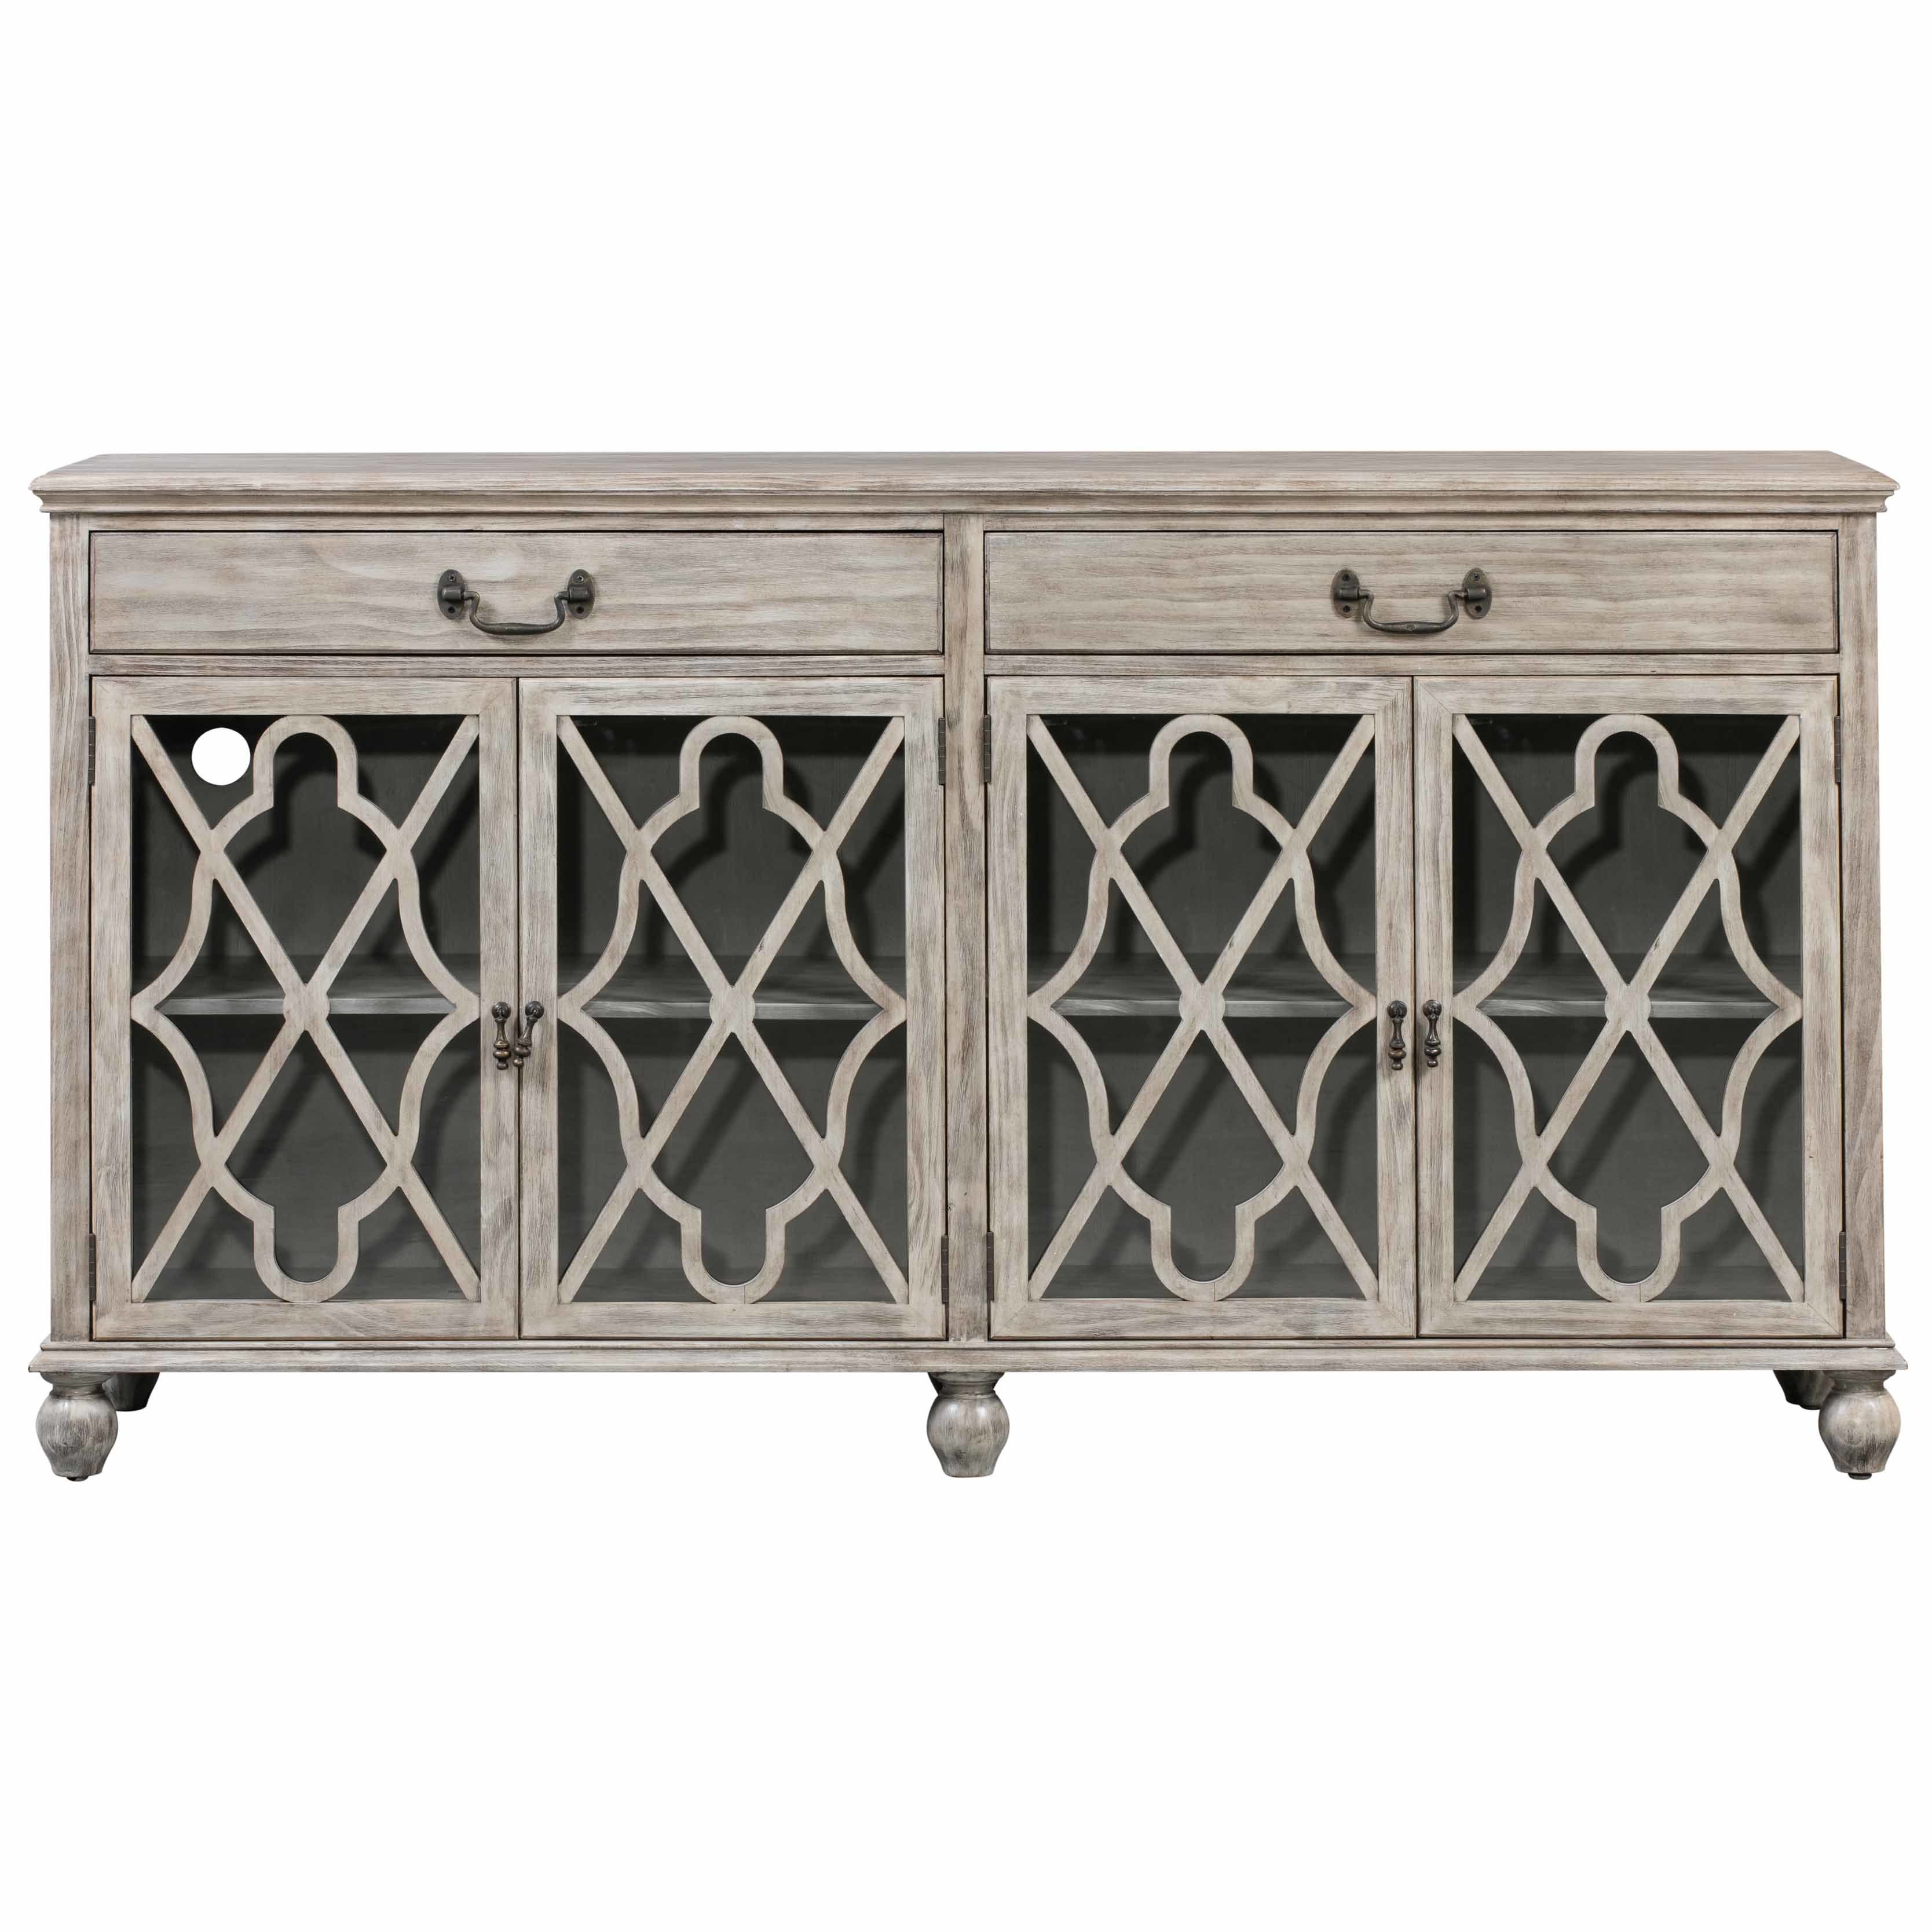 Widely Used Tott And Eling Sideboards Within Mayra Sideboard (View 4 of 20)